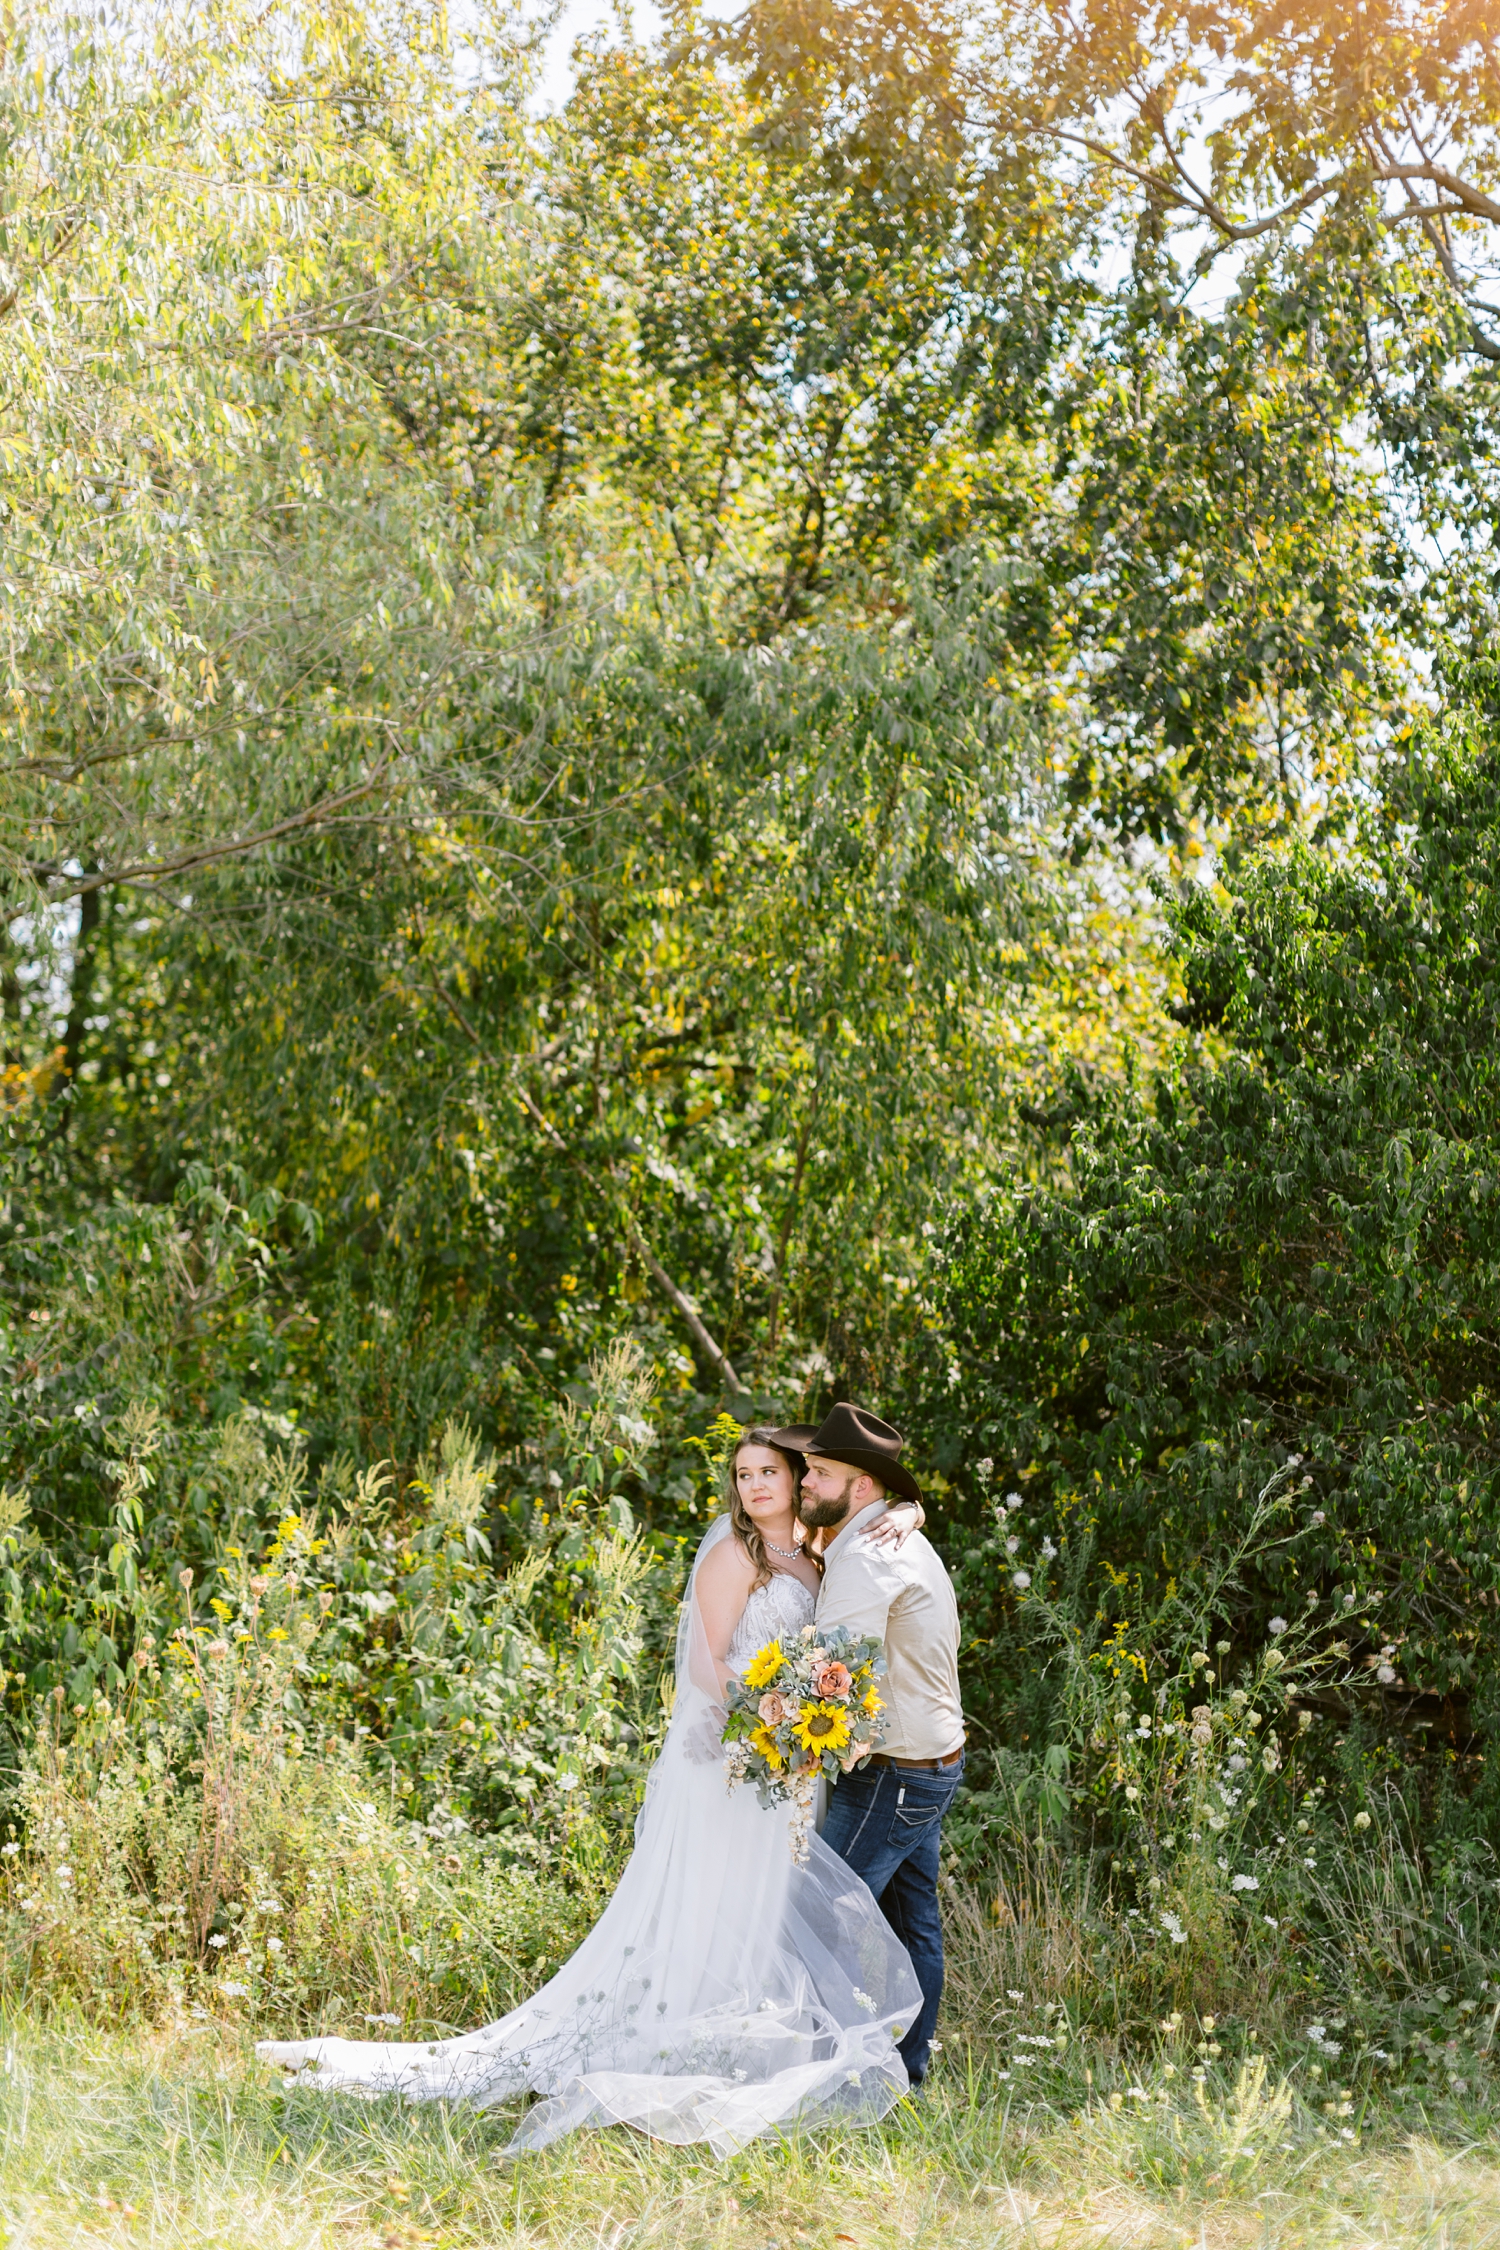 Megan and Matt embrace and look off in the distance in a grassy, flower field in Knoxville, IA | A rustic, country wedding with western touches | CB Studio